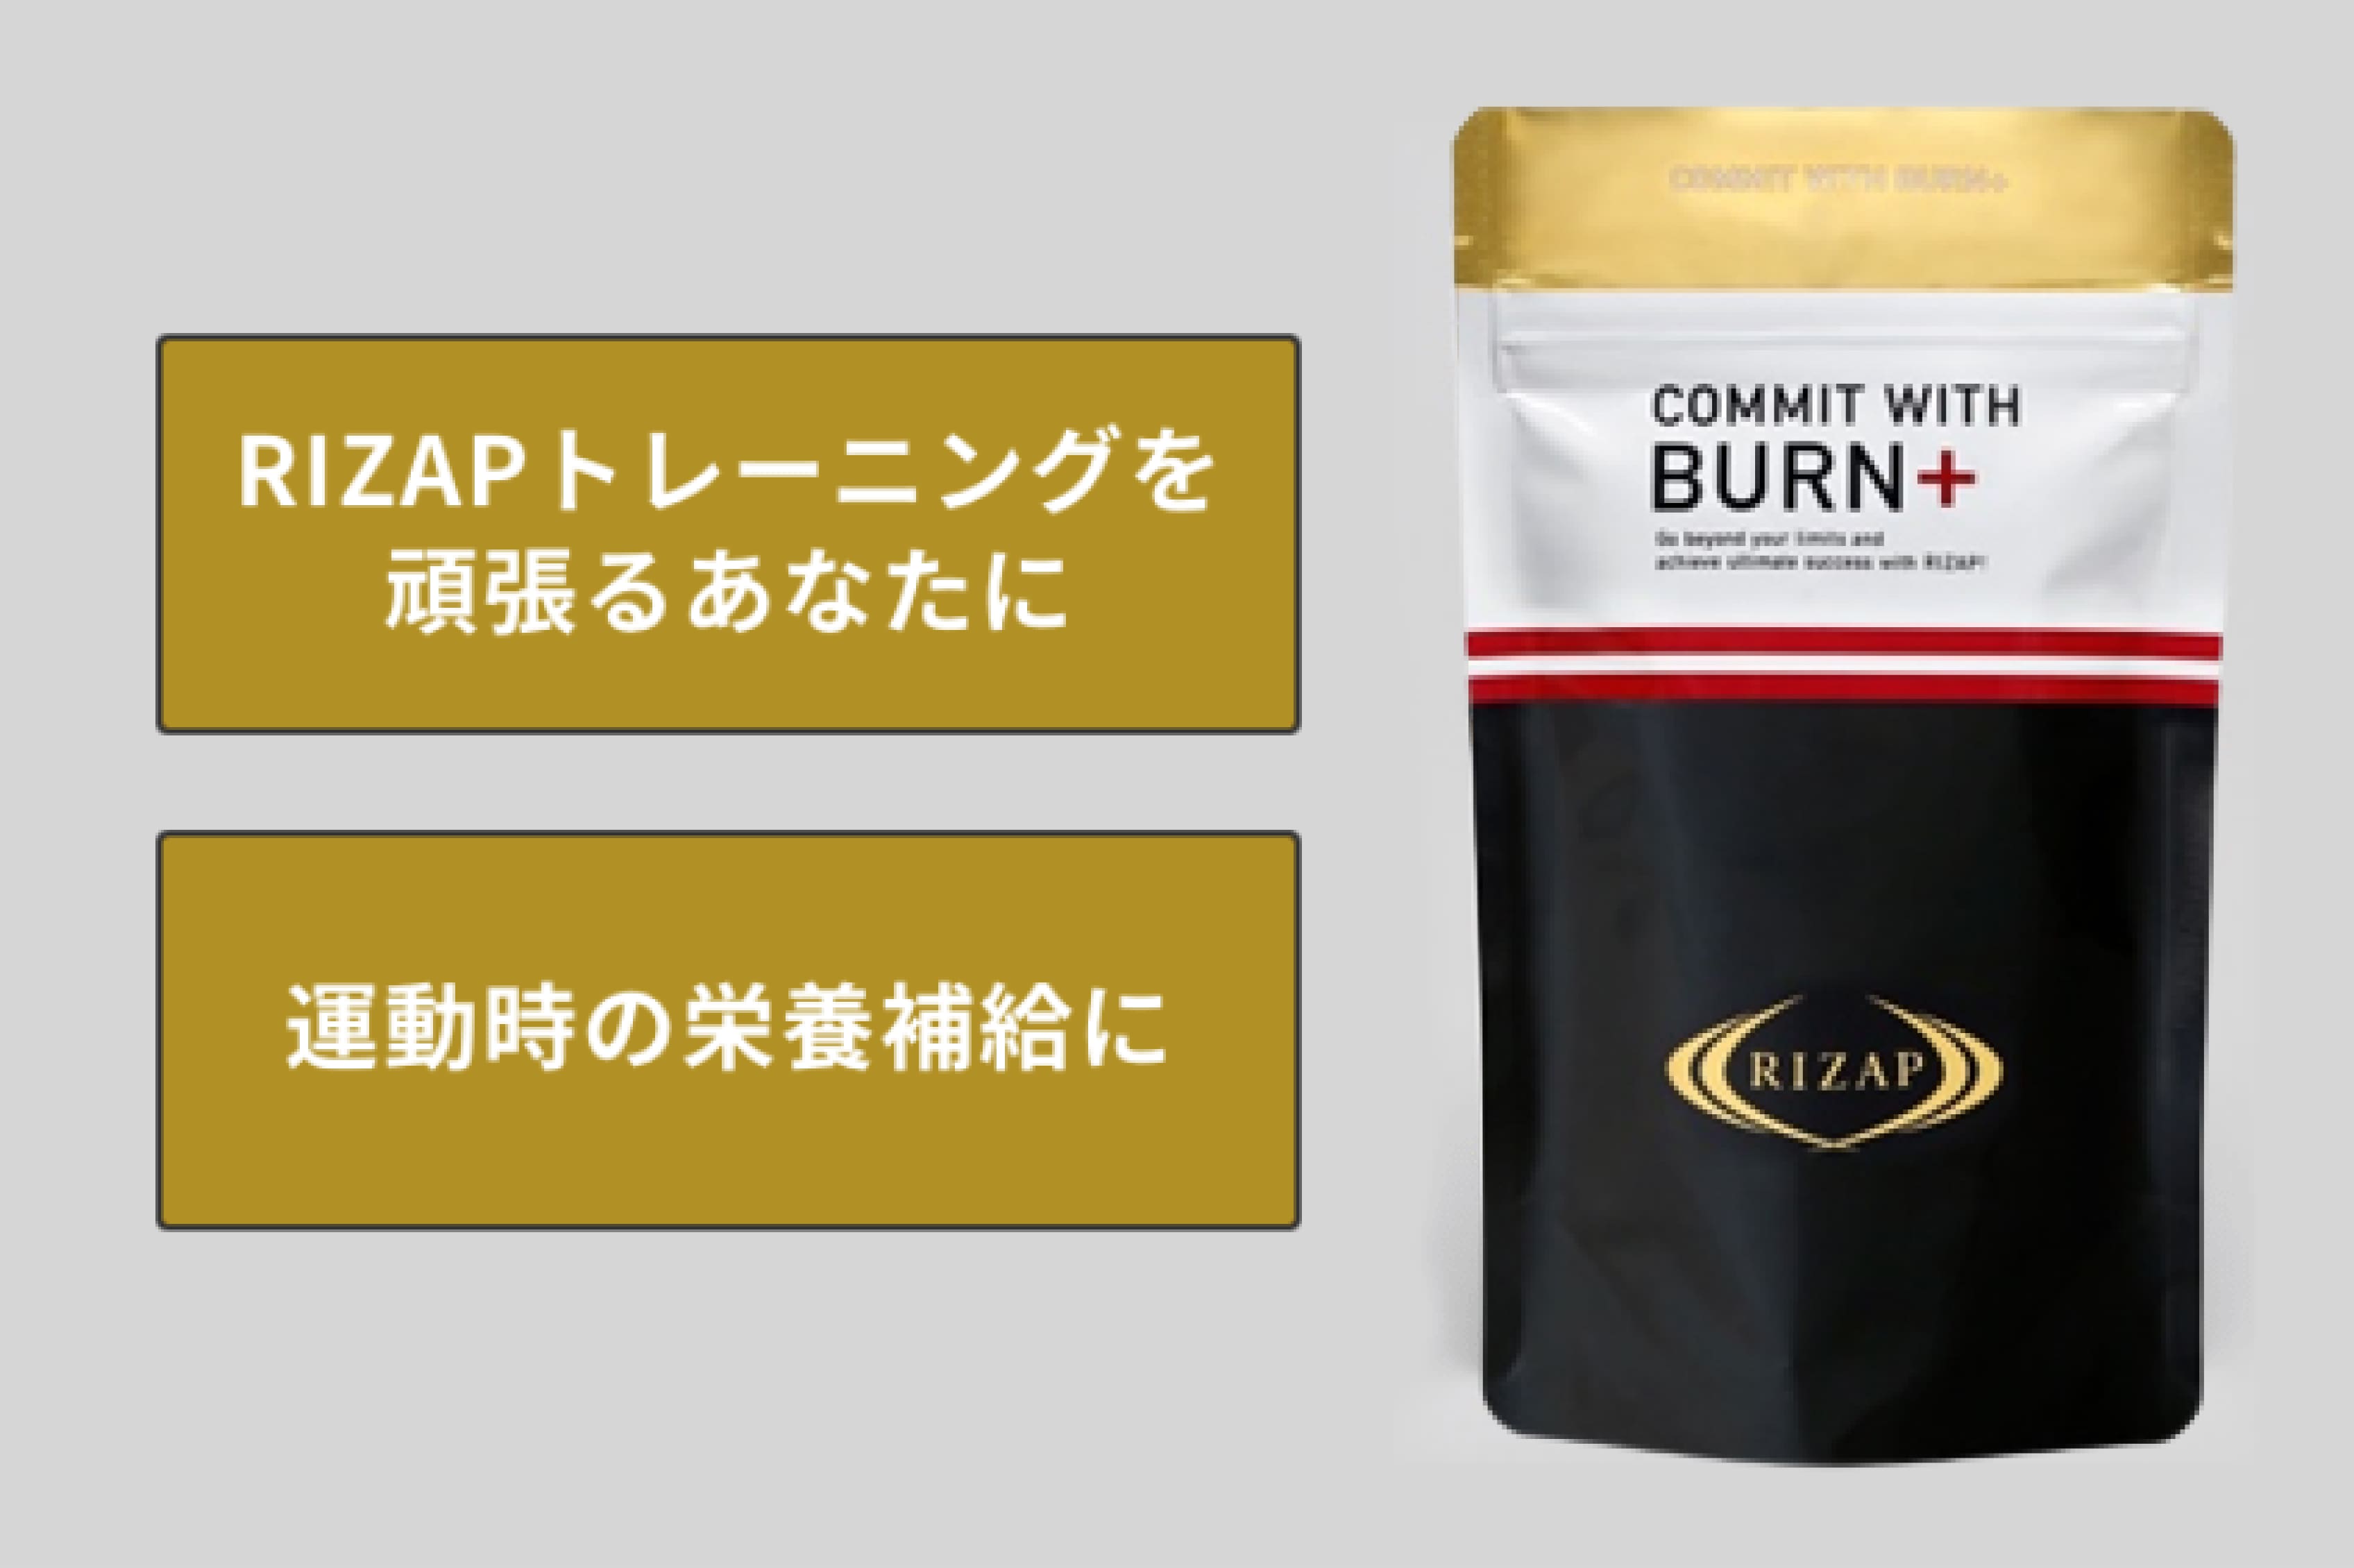 <>COMMIT WITH BURN+